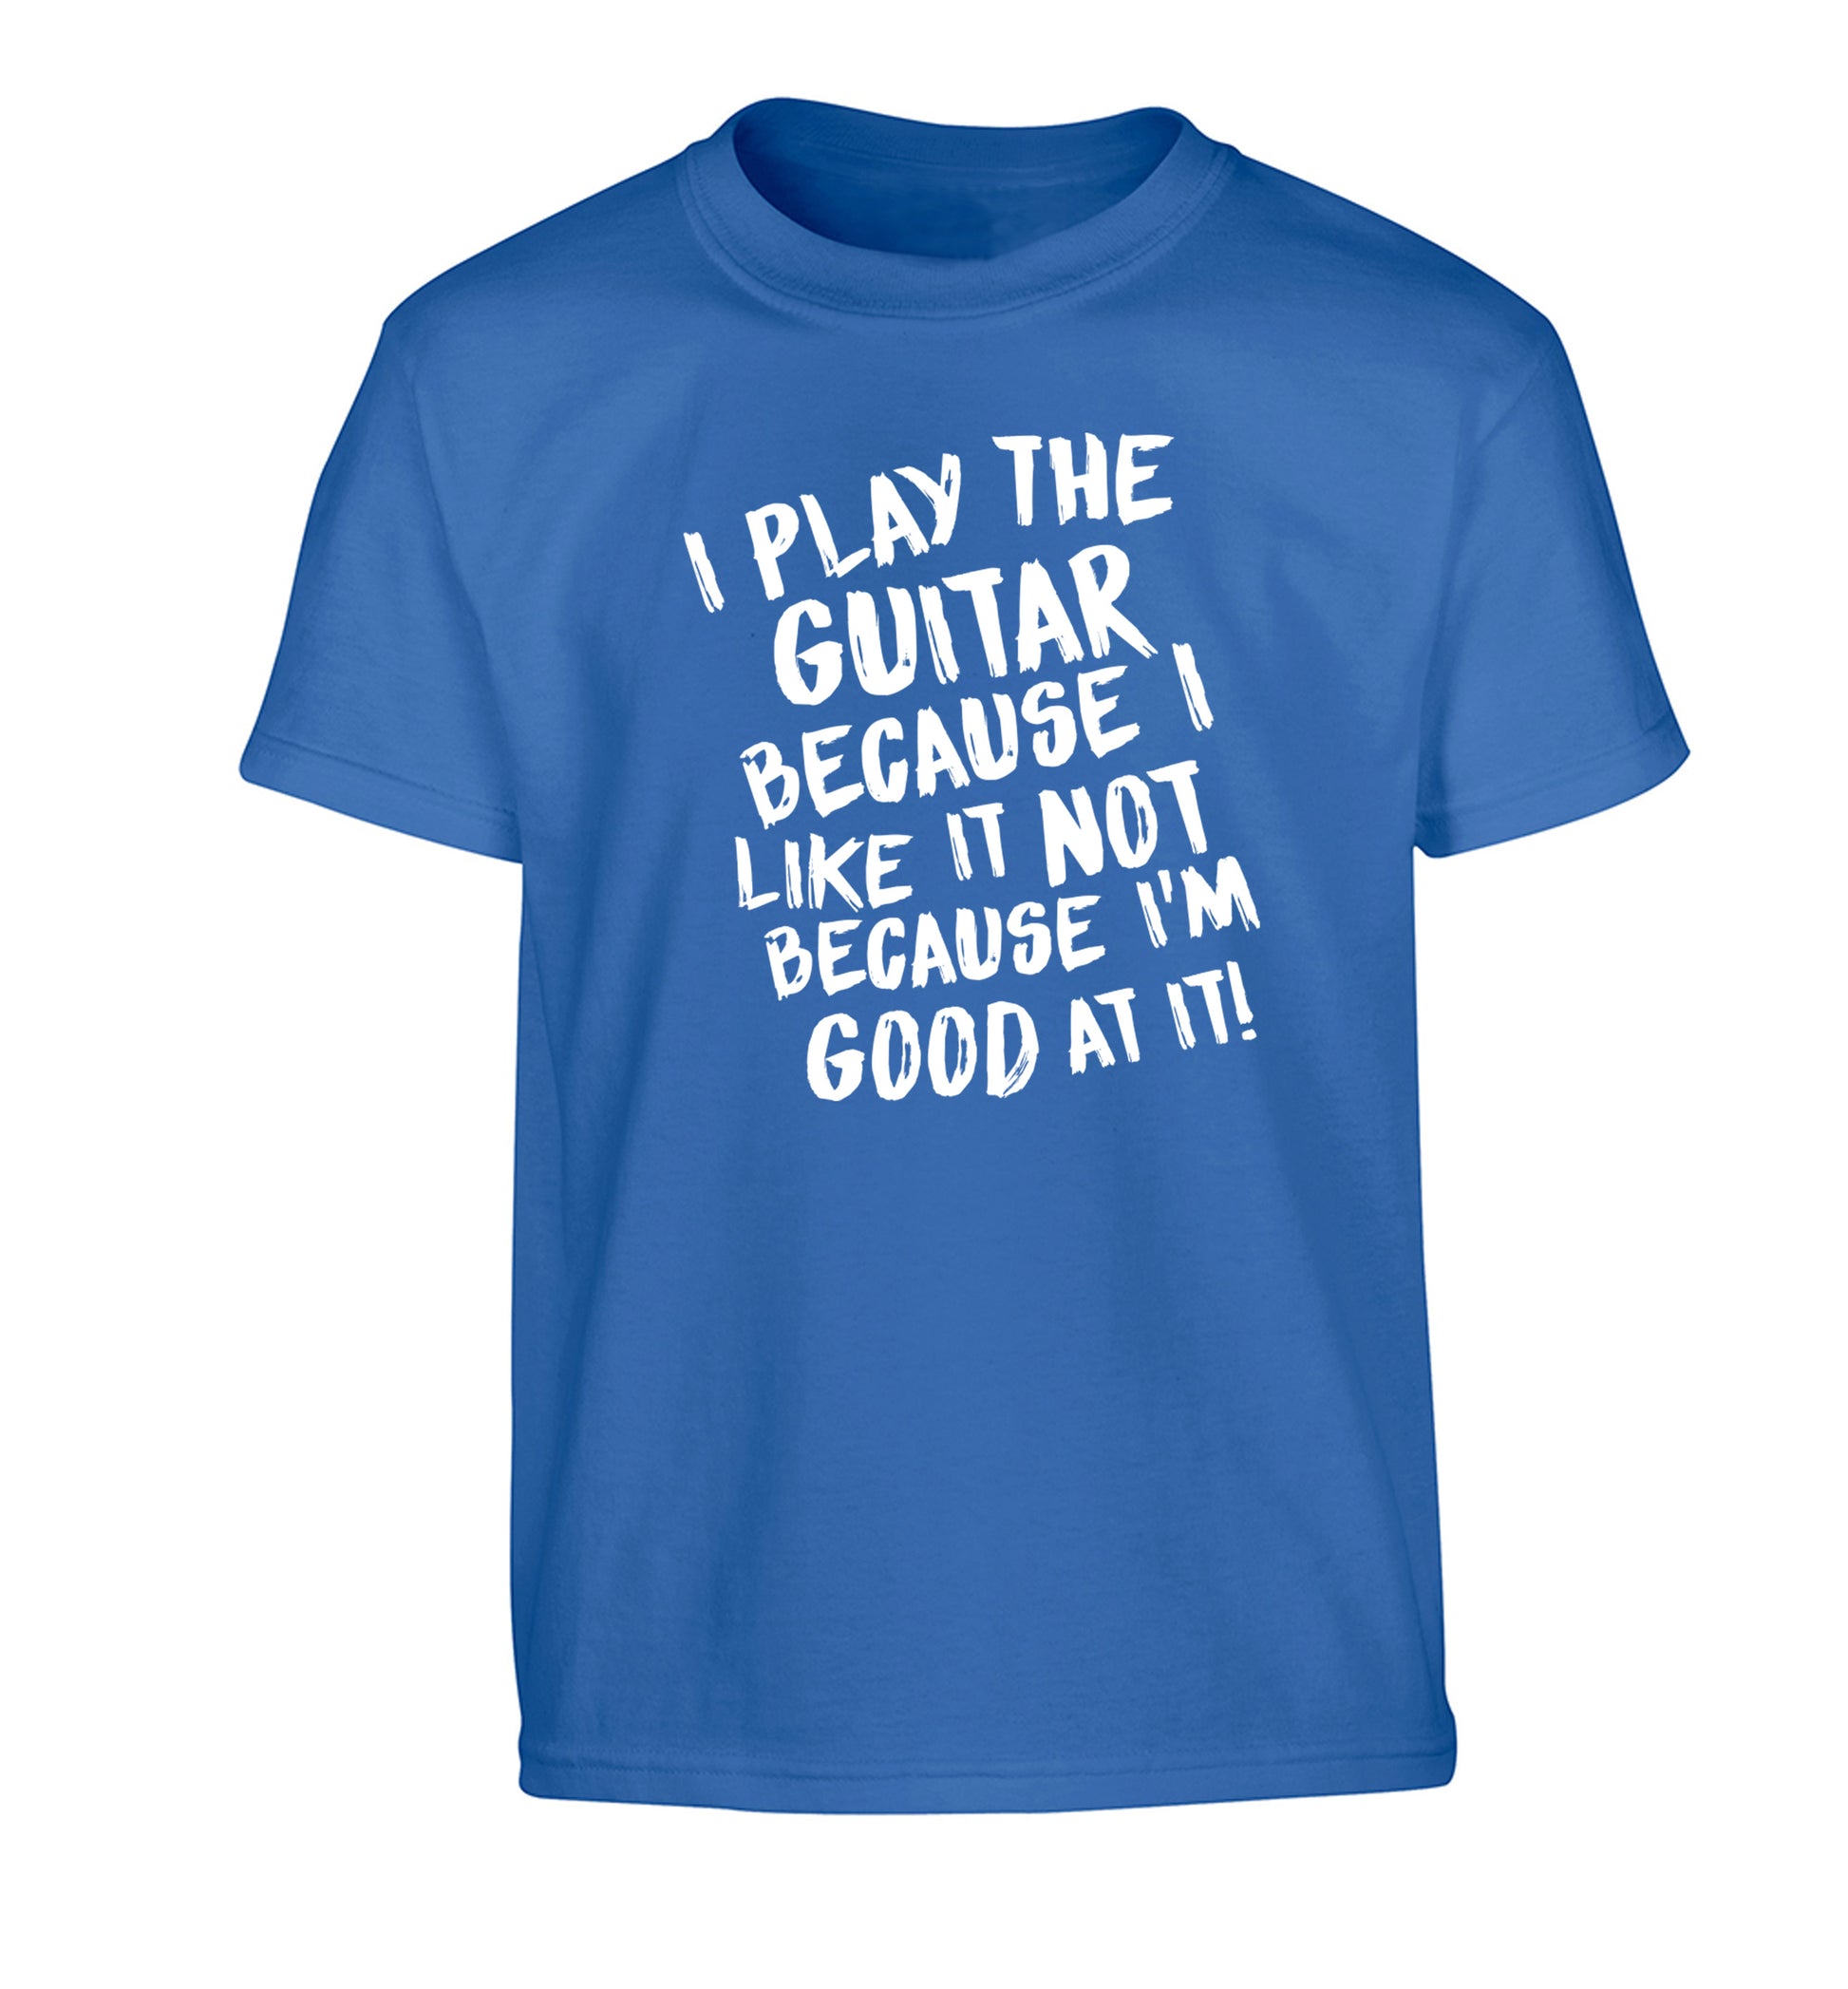 I play the guitar because I like it not because I'm good at it Children's blue Tshirt 12-14 Years